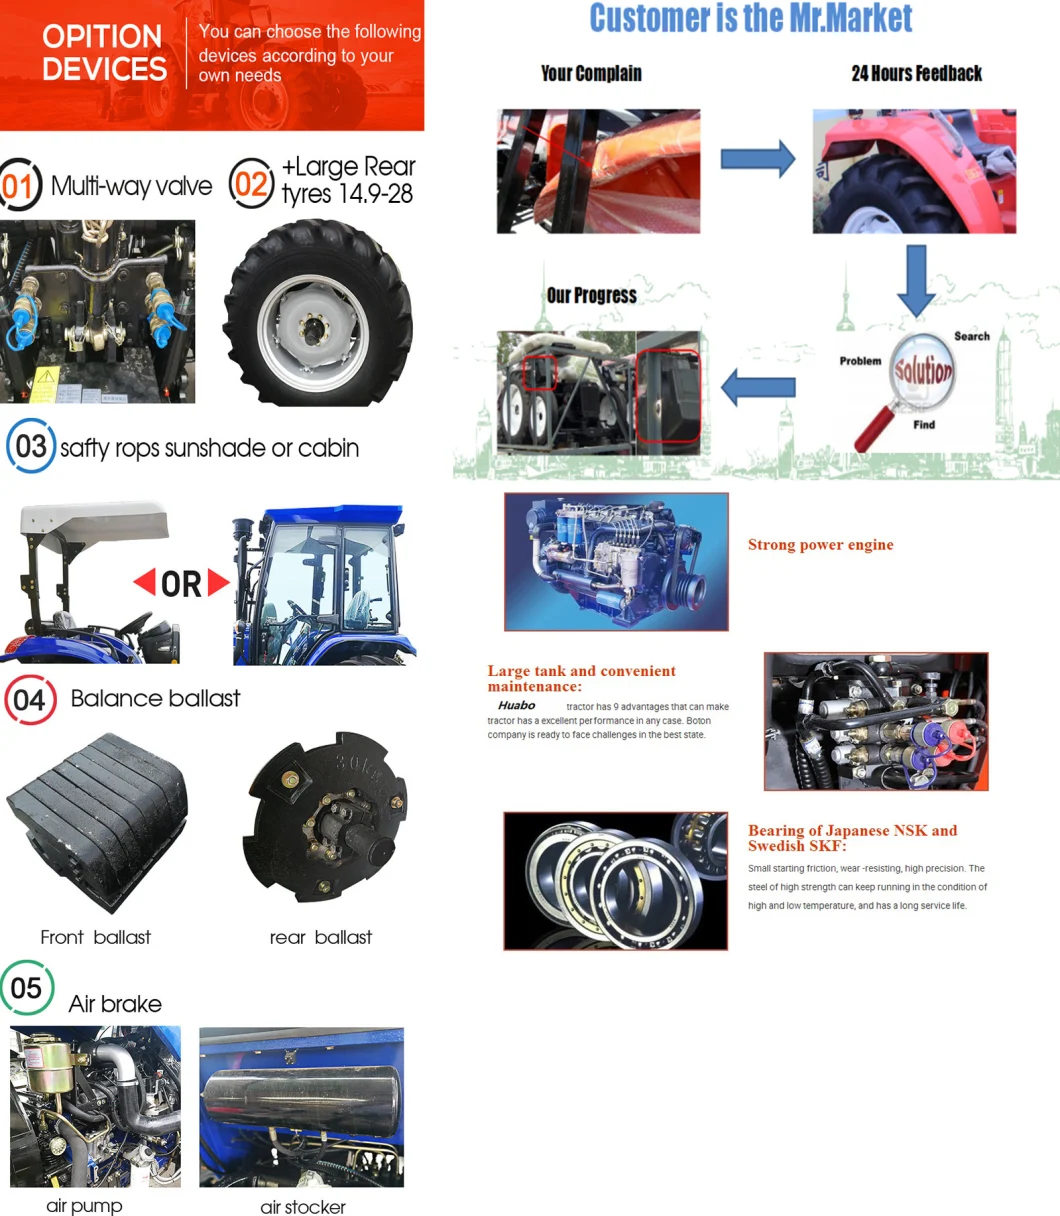 Agricultural Machine /Agricultural Equipment/Agricultural Farm Tractor for Sale